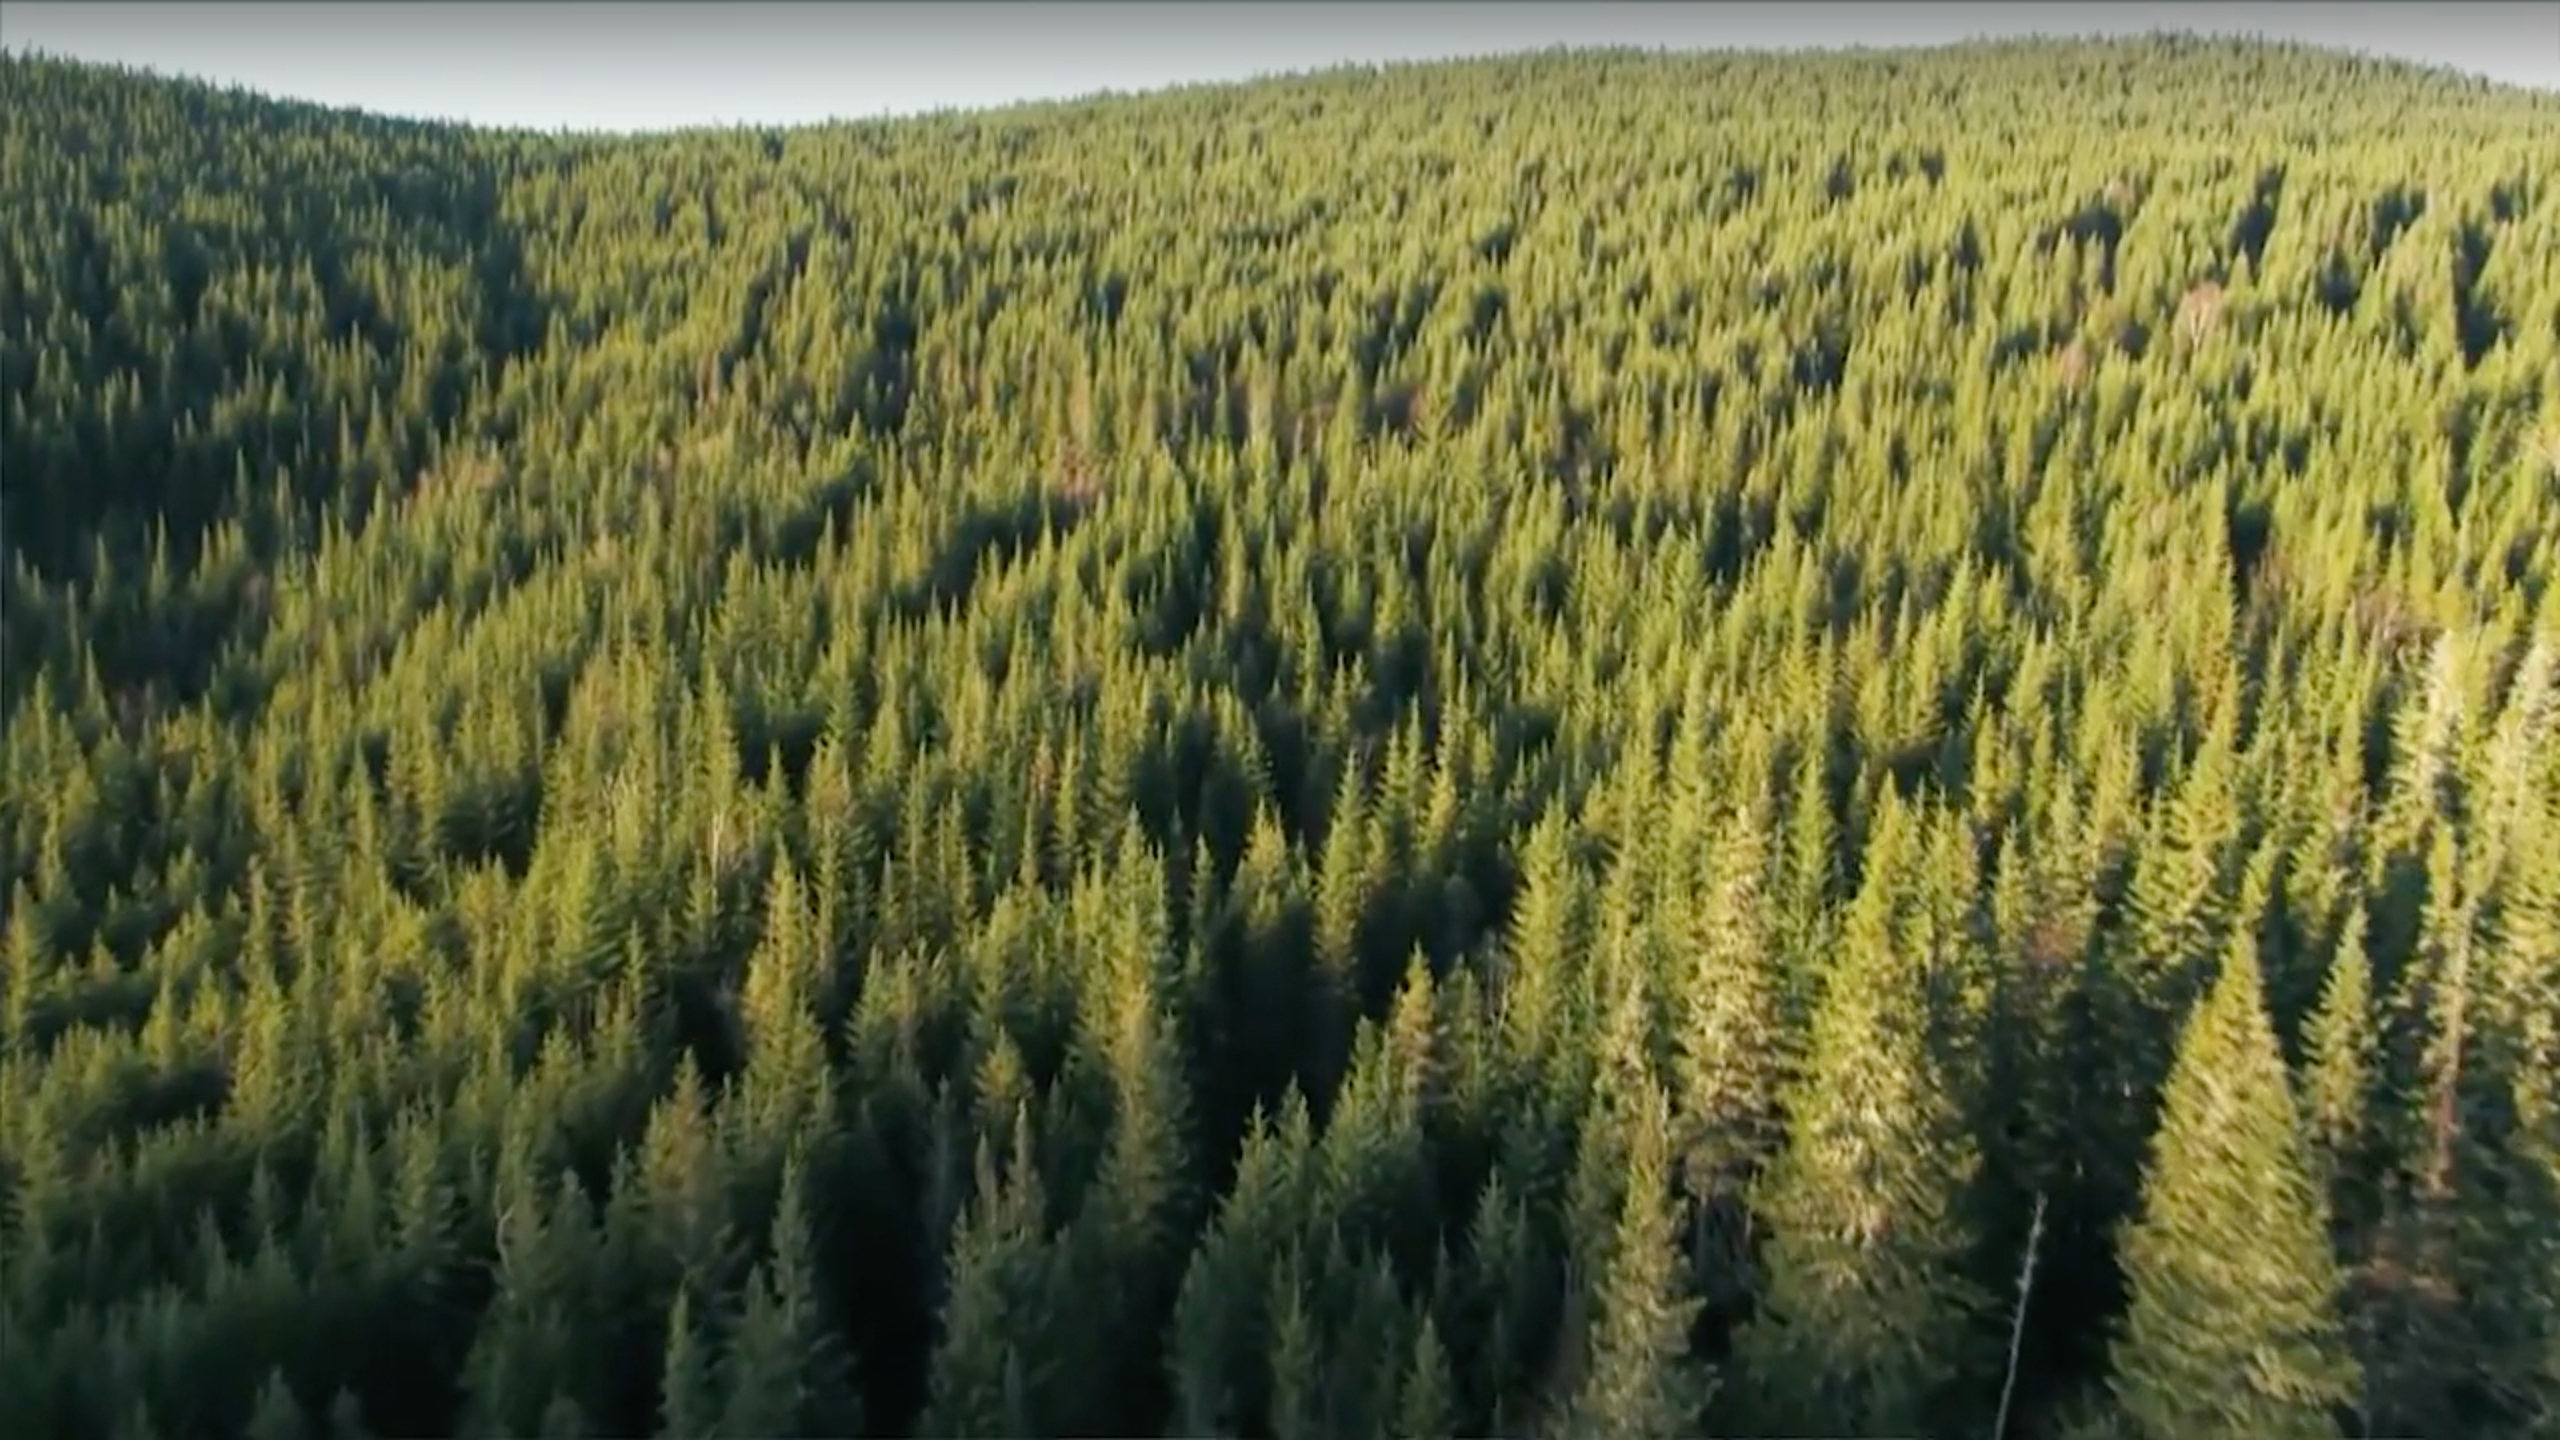 Evergreen forest view from the sky with narrow horizon.